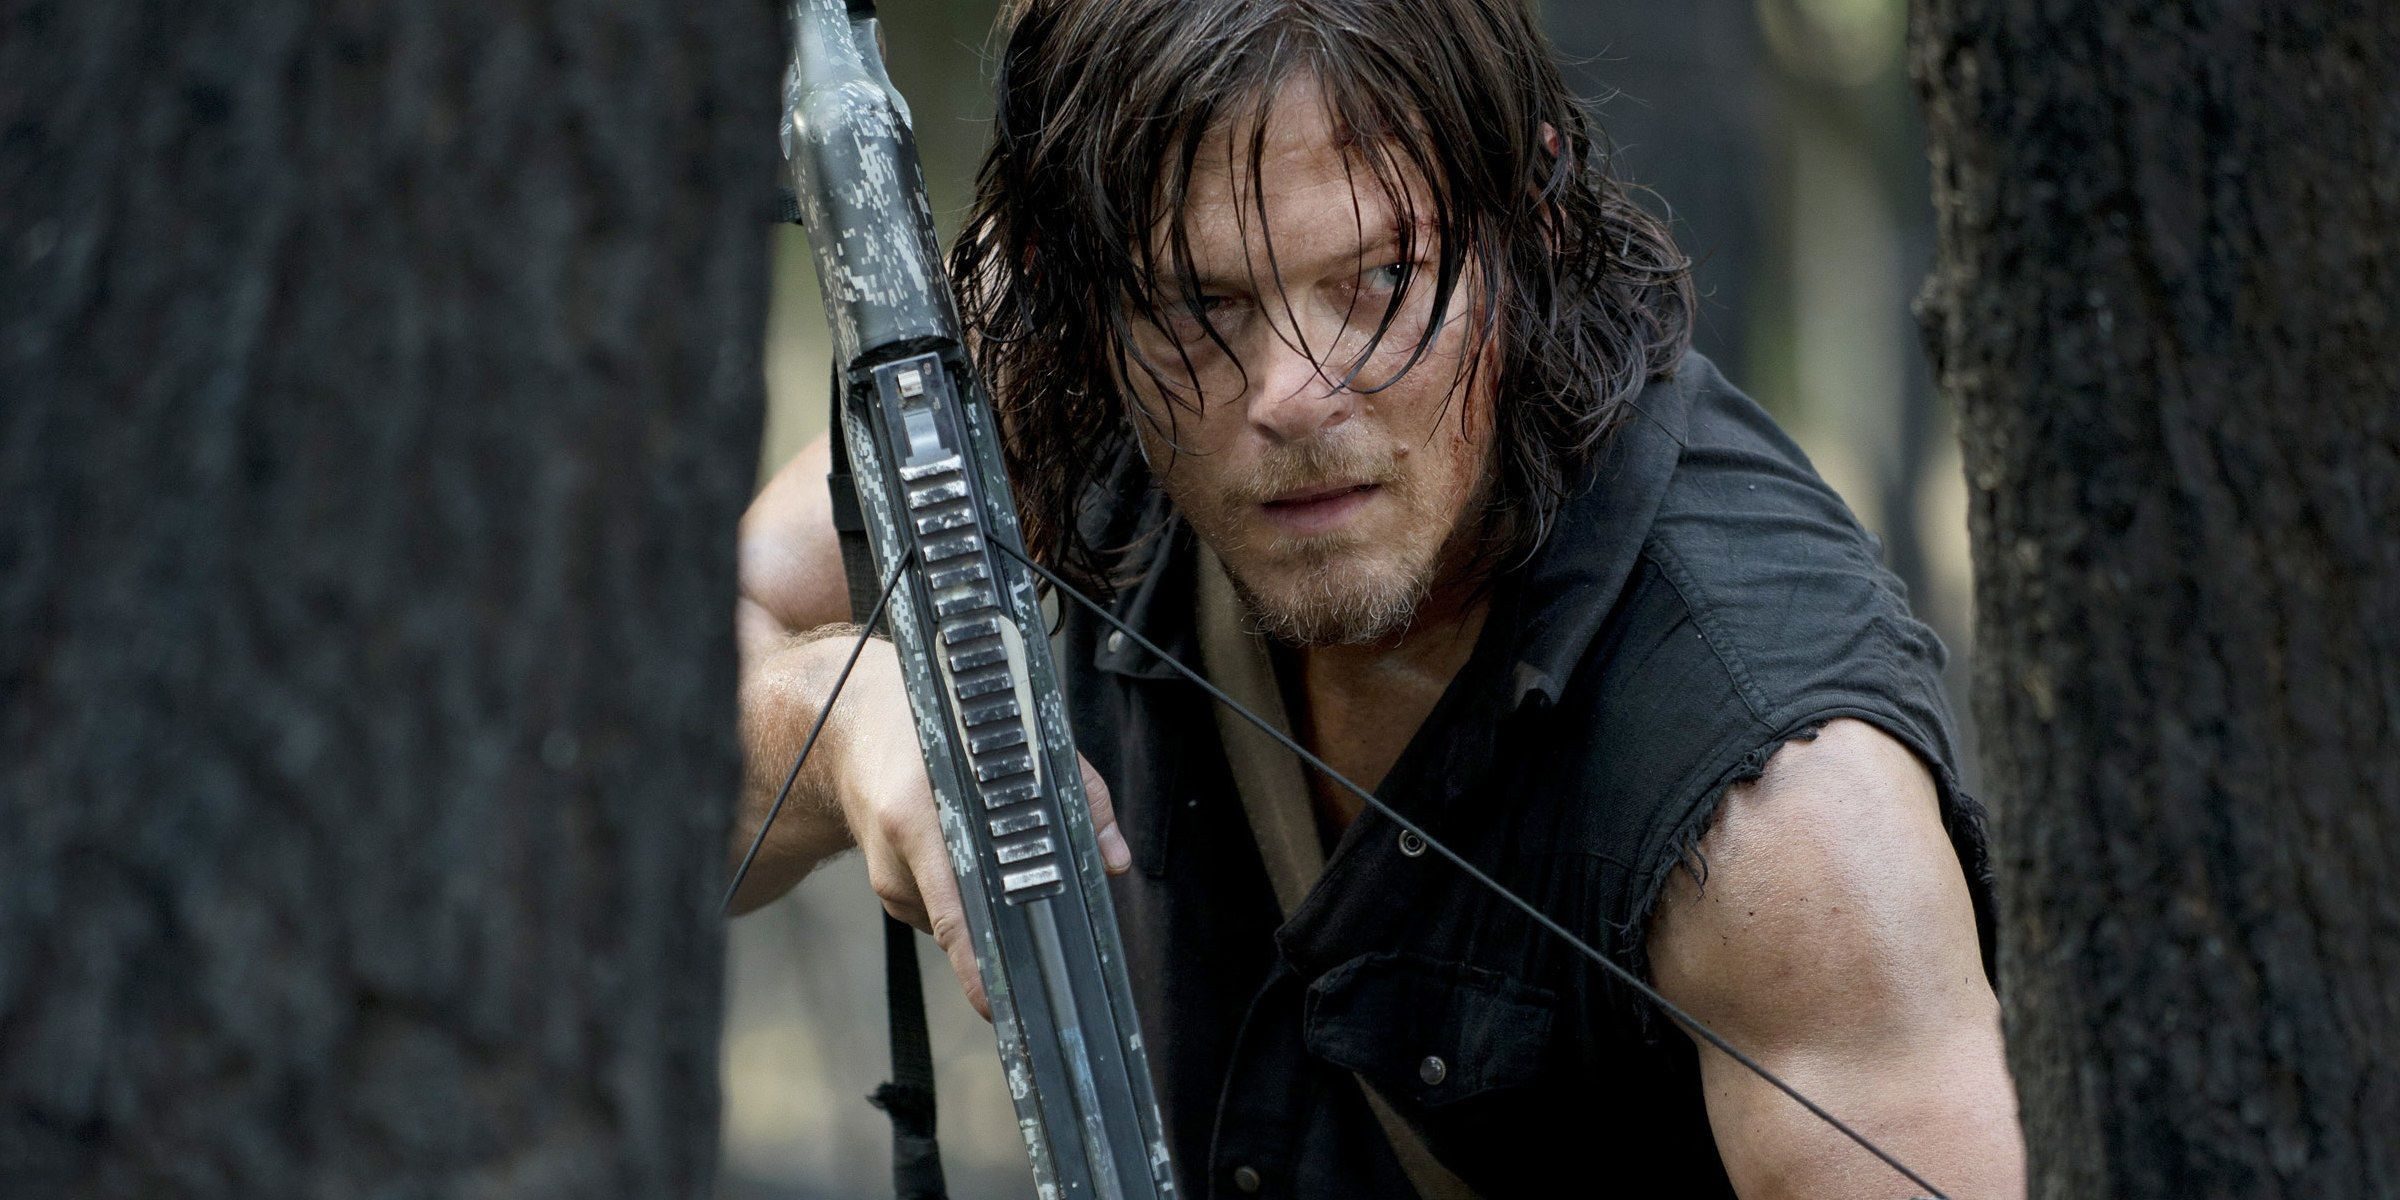 norman-reedus-as-daryl-dixon-in-the-walking-marbh-5759921